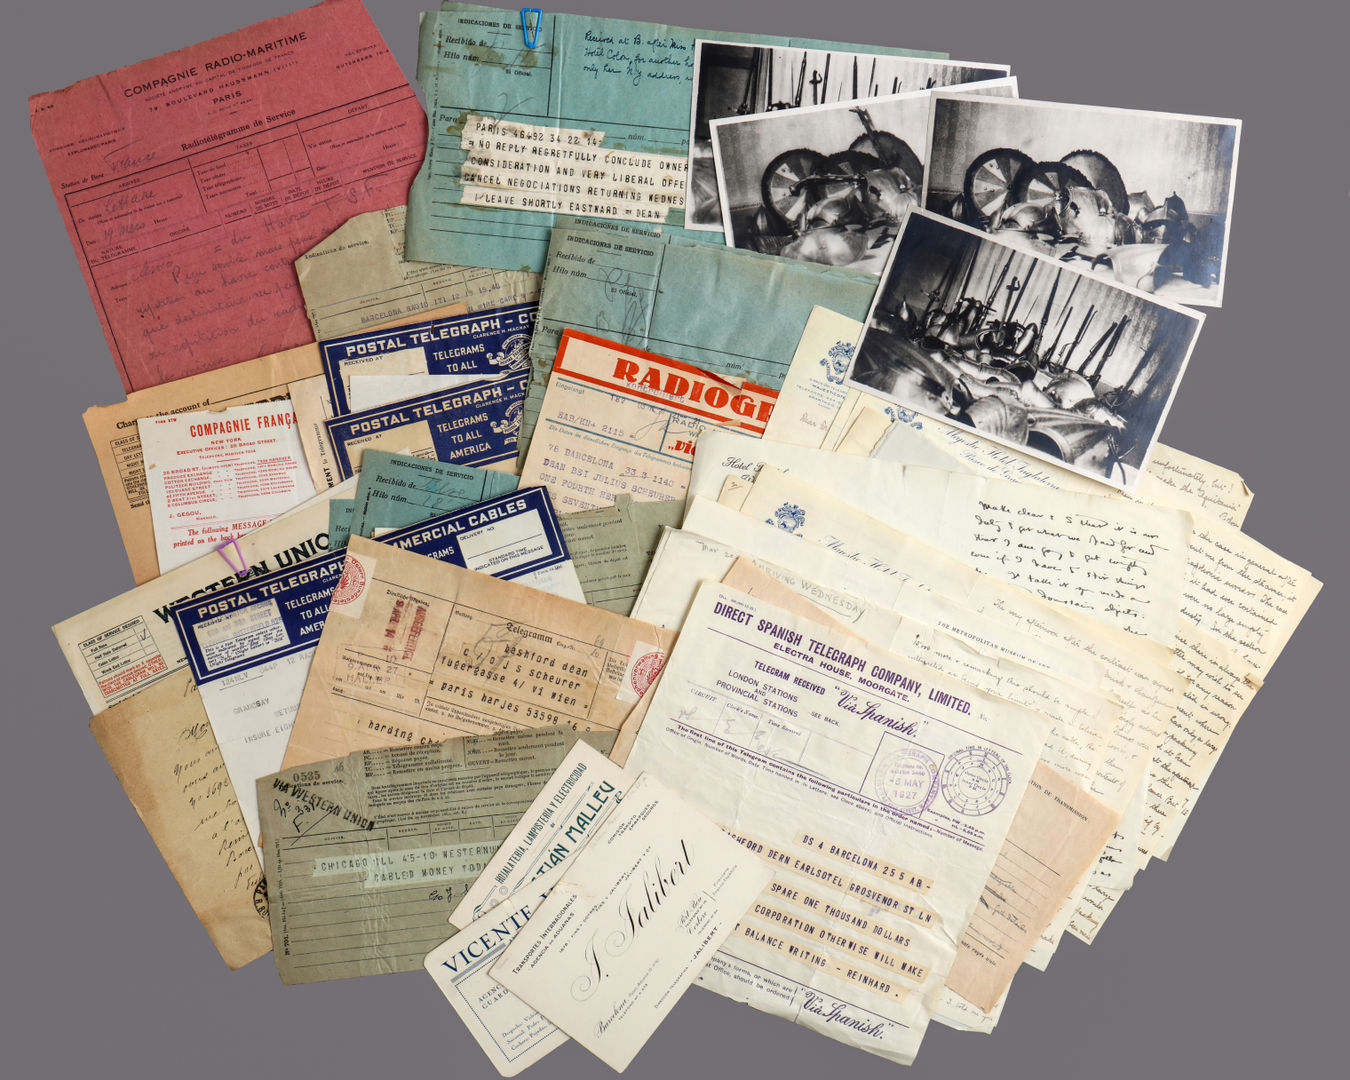 Various ephemera and correspondence photographed on a light gray background